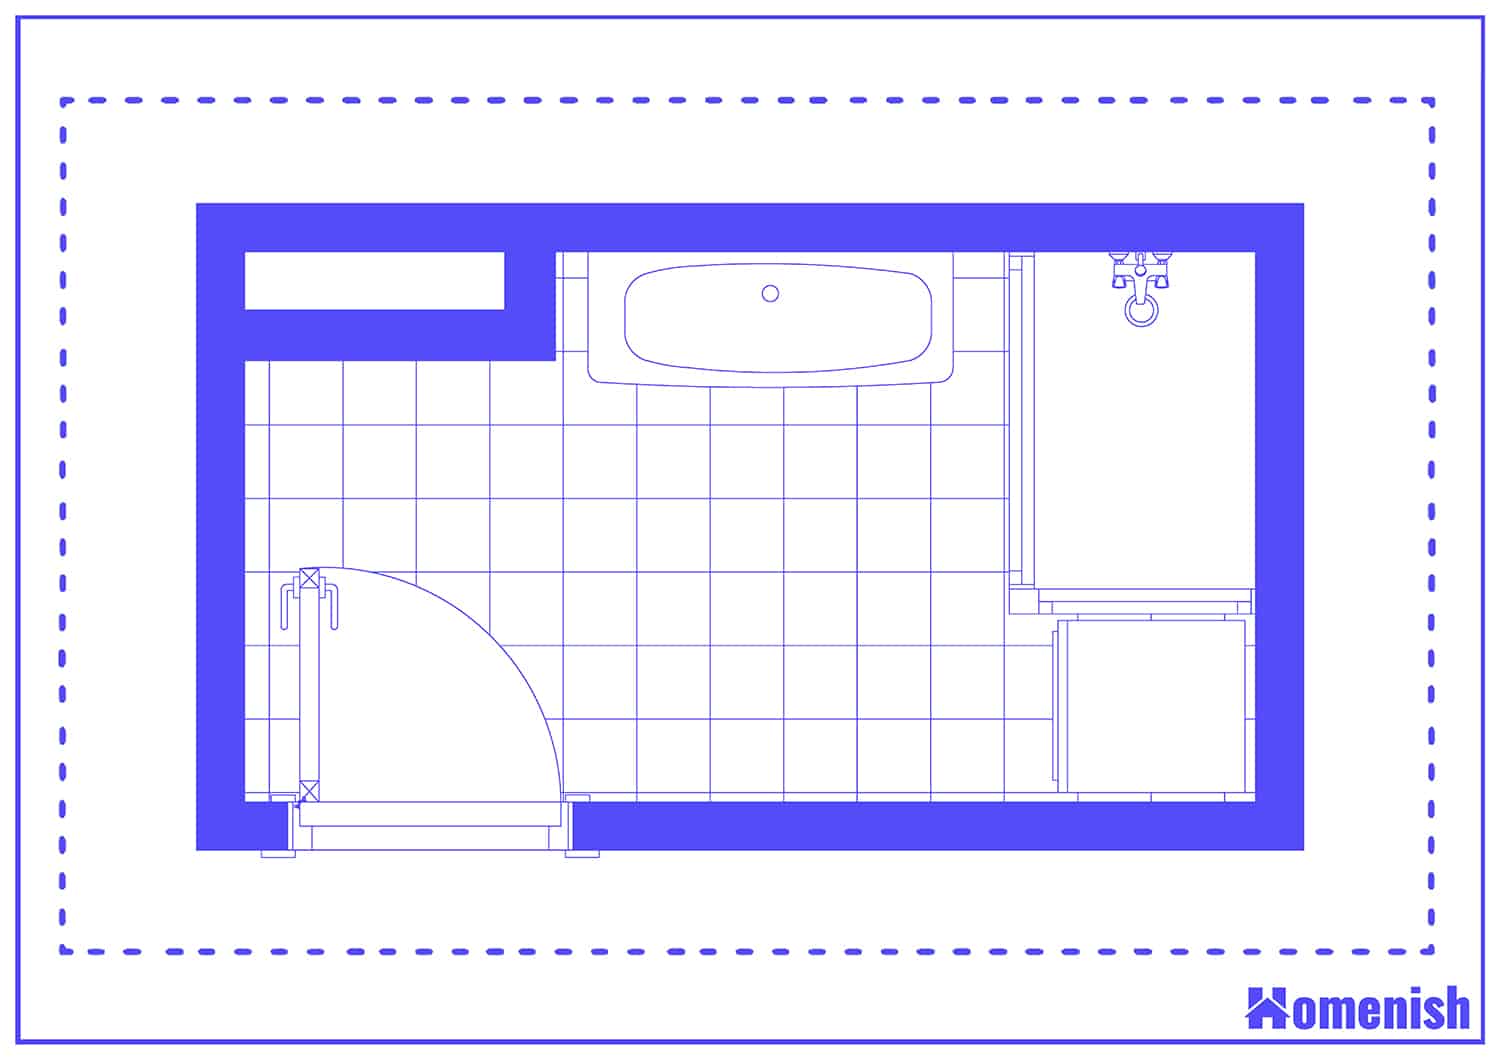 Compact Shower and Laundry Space Floor Plan